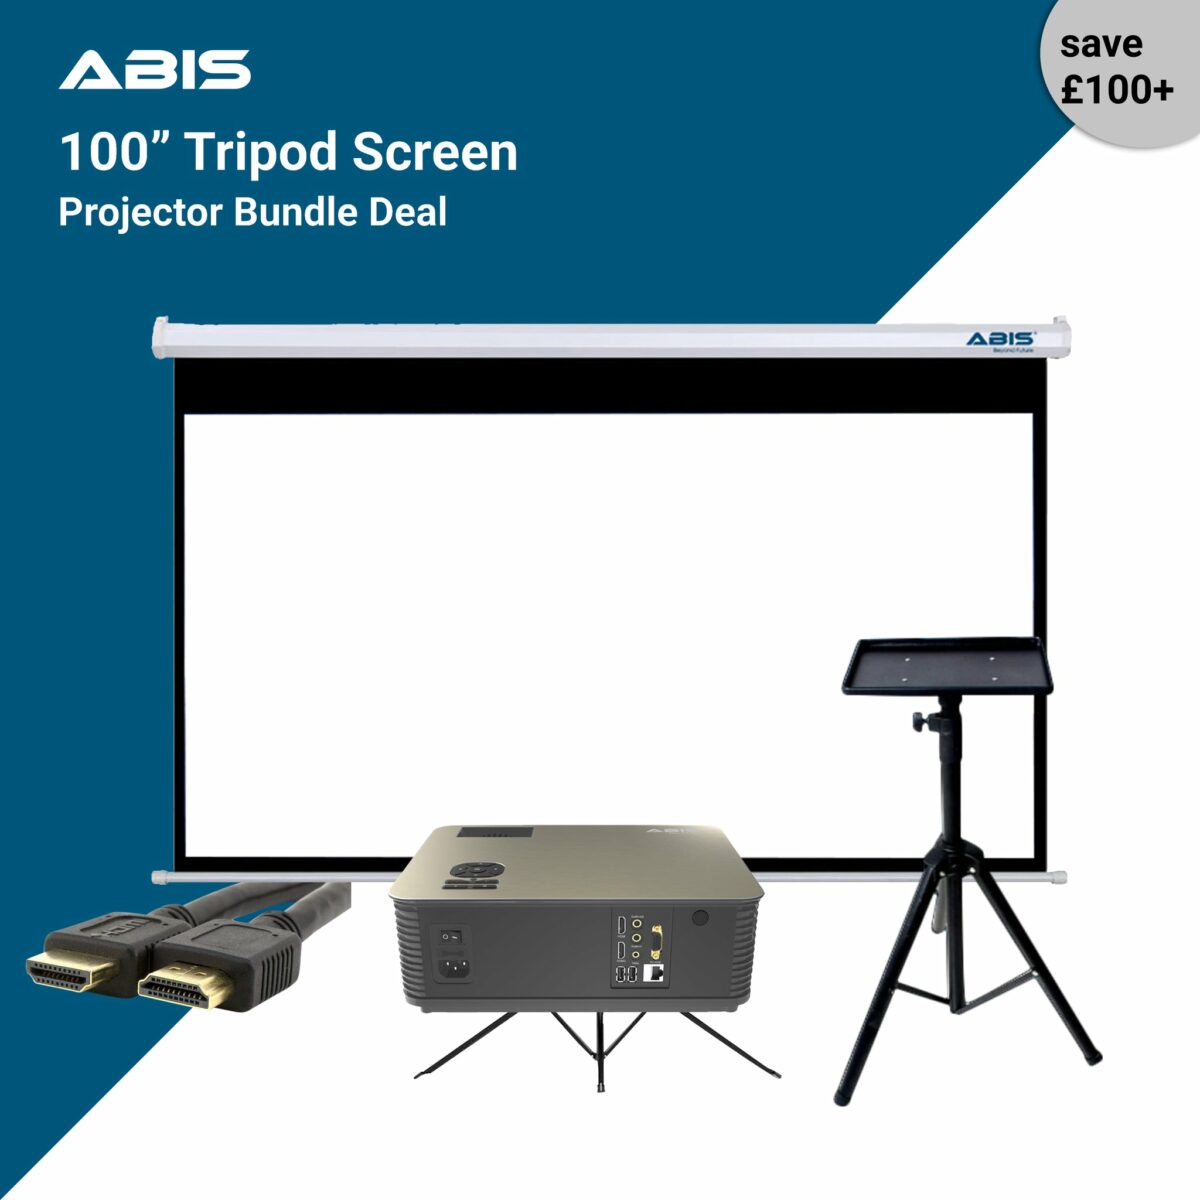 UHD Projector and Portable Projector Screen 6K 100 inches - ABIS